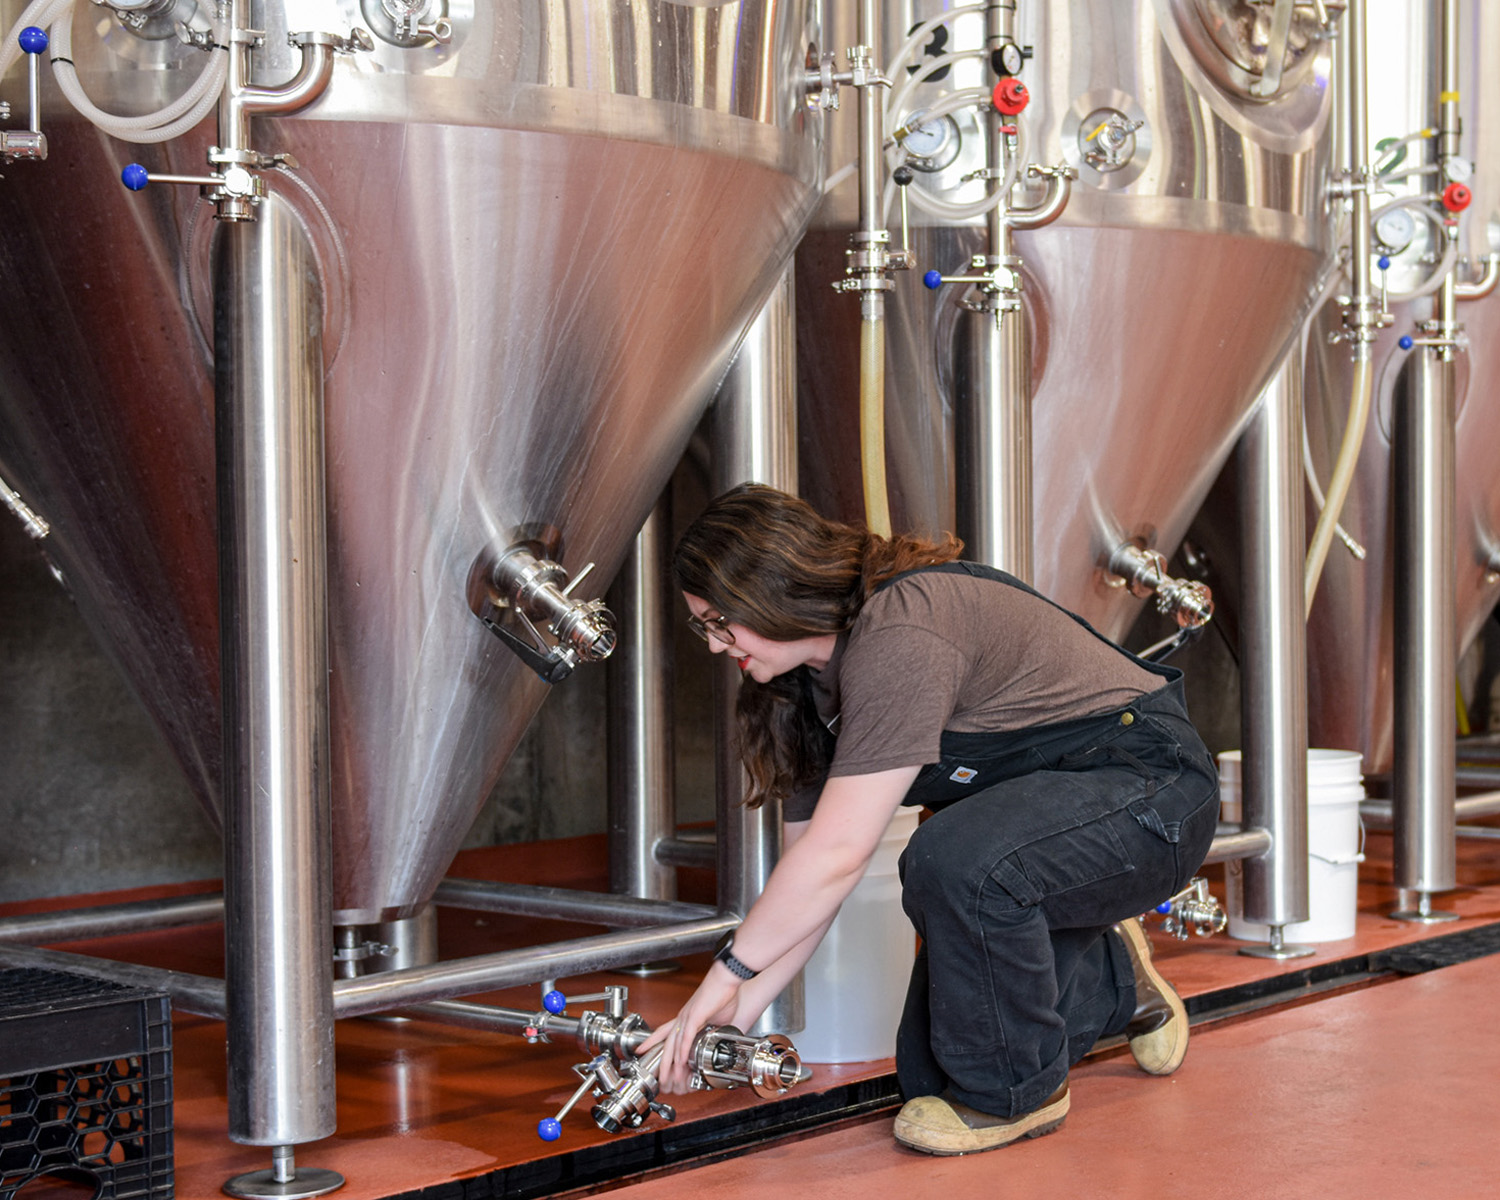 shannon, a brewer, adjusting a tank